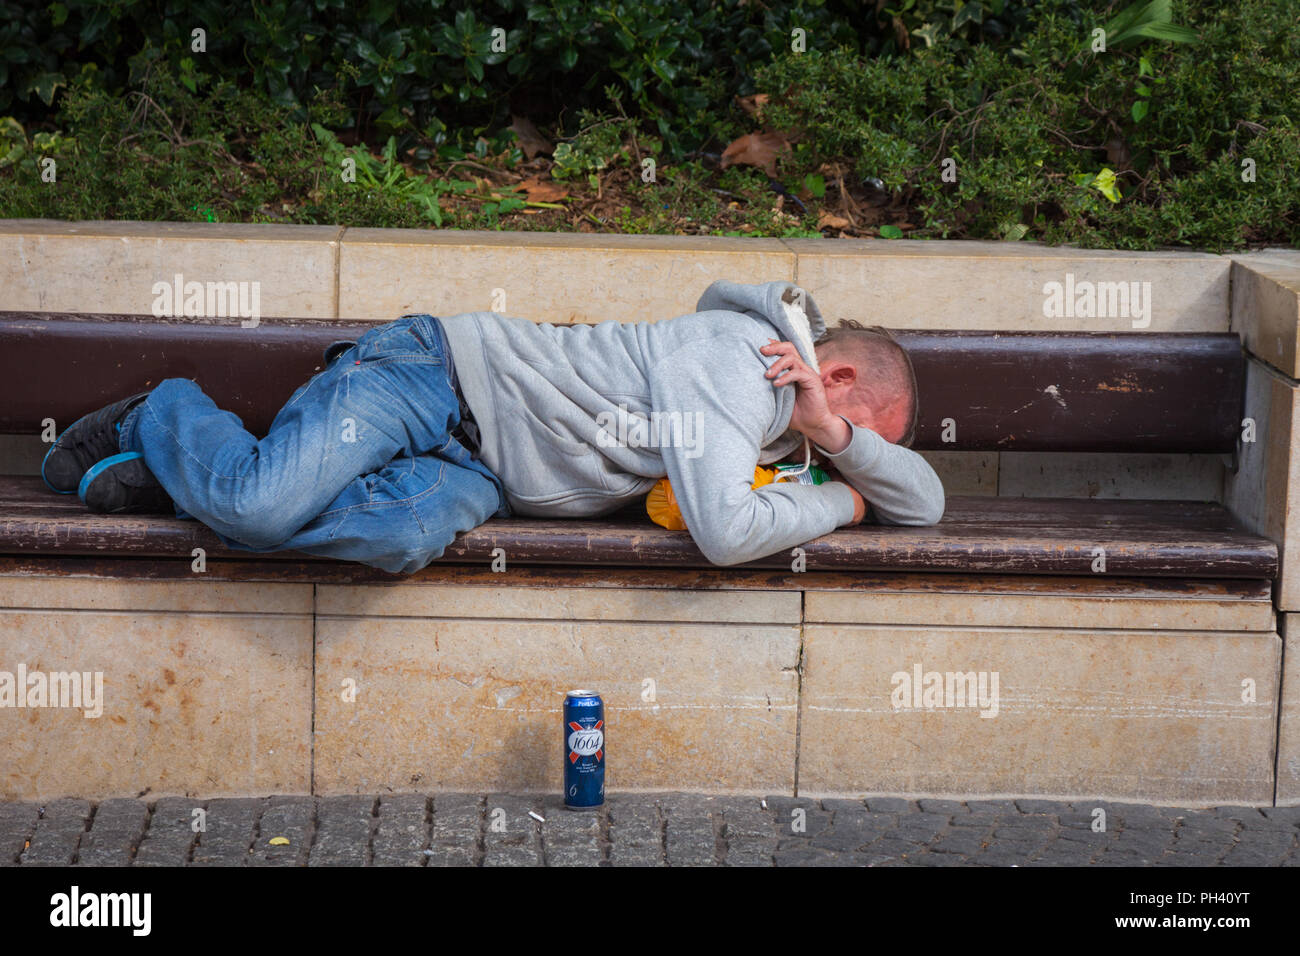 Man lying asleep on a public bench who may be drunk and asleep, Bristol UK Stock Photo